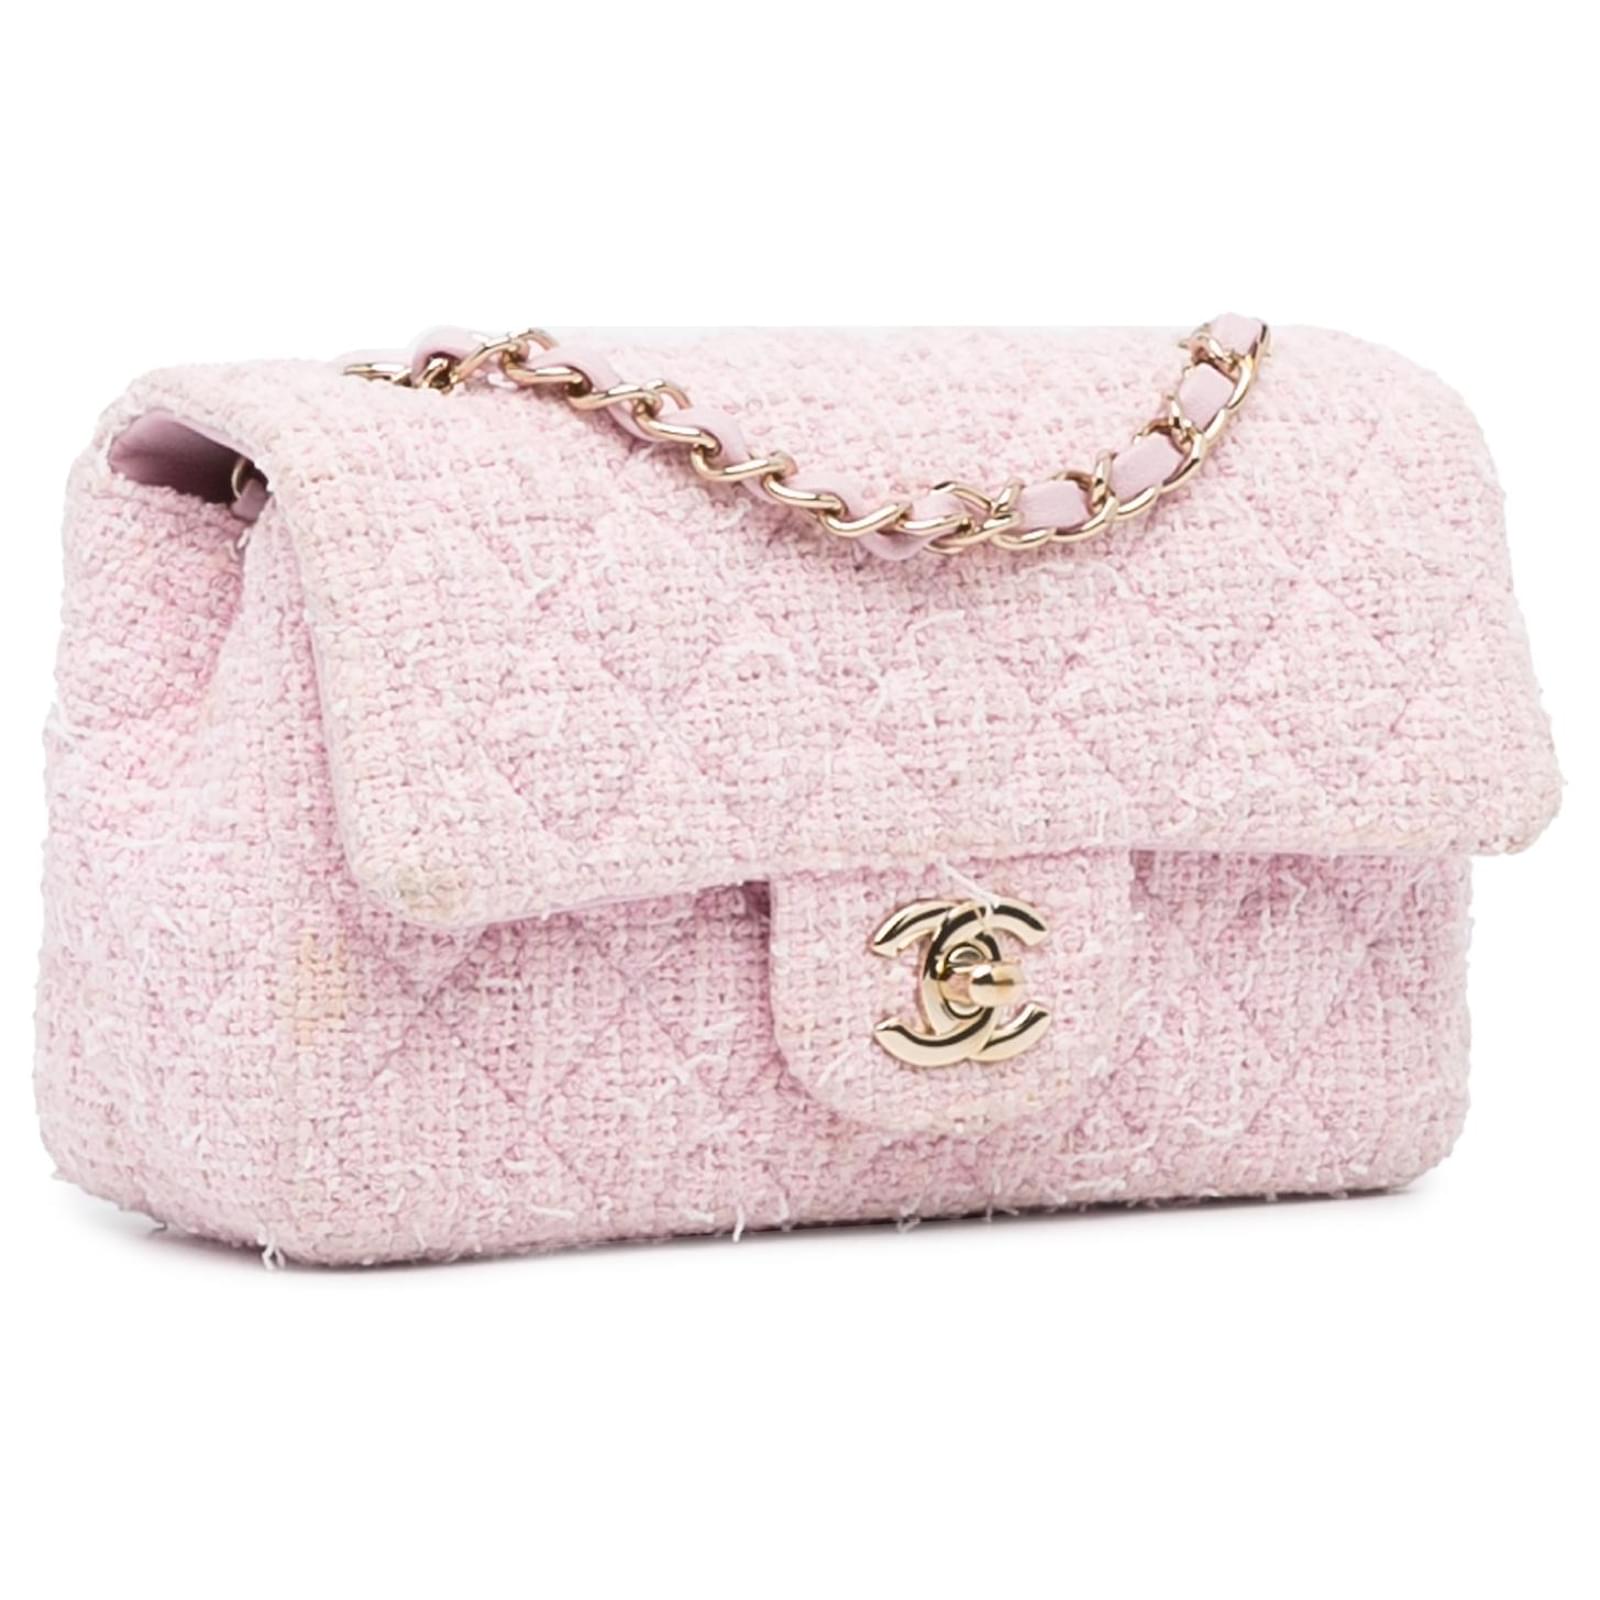 CHANEL Tweed Quilted Mini Rectangular Flap Light Pink White | FASHIONPHILE